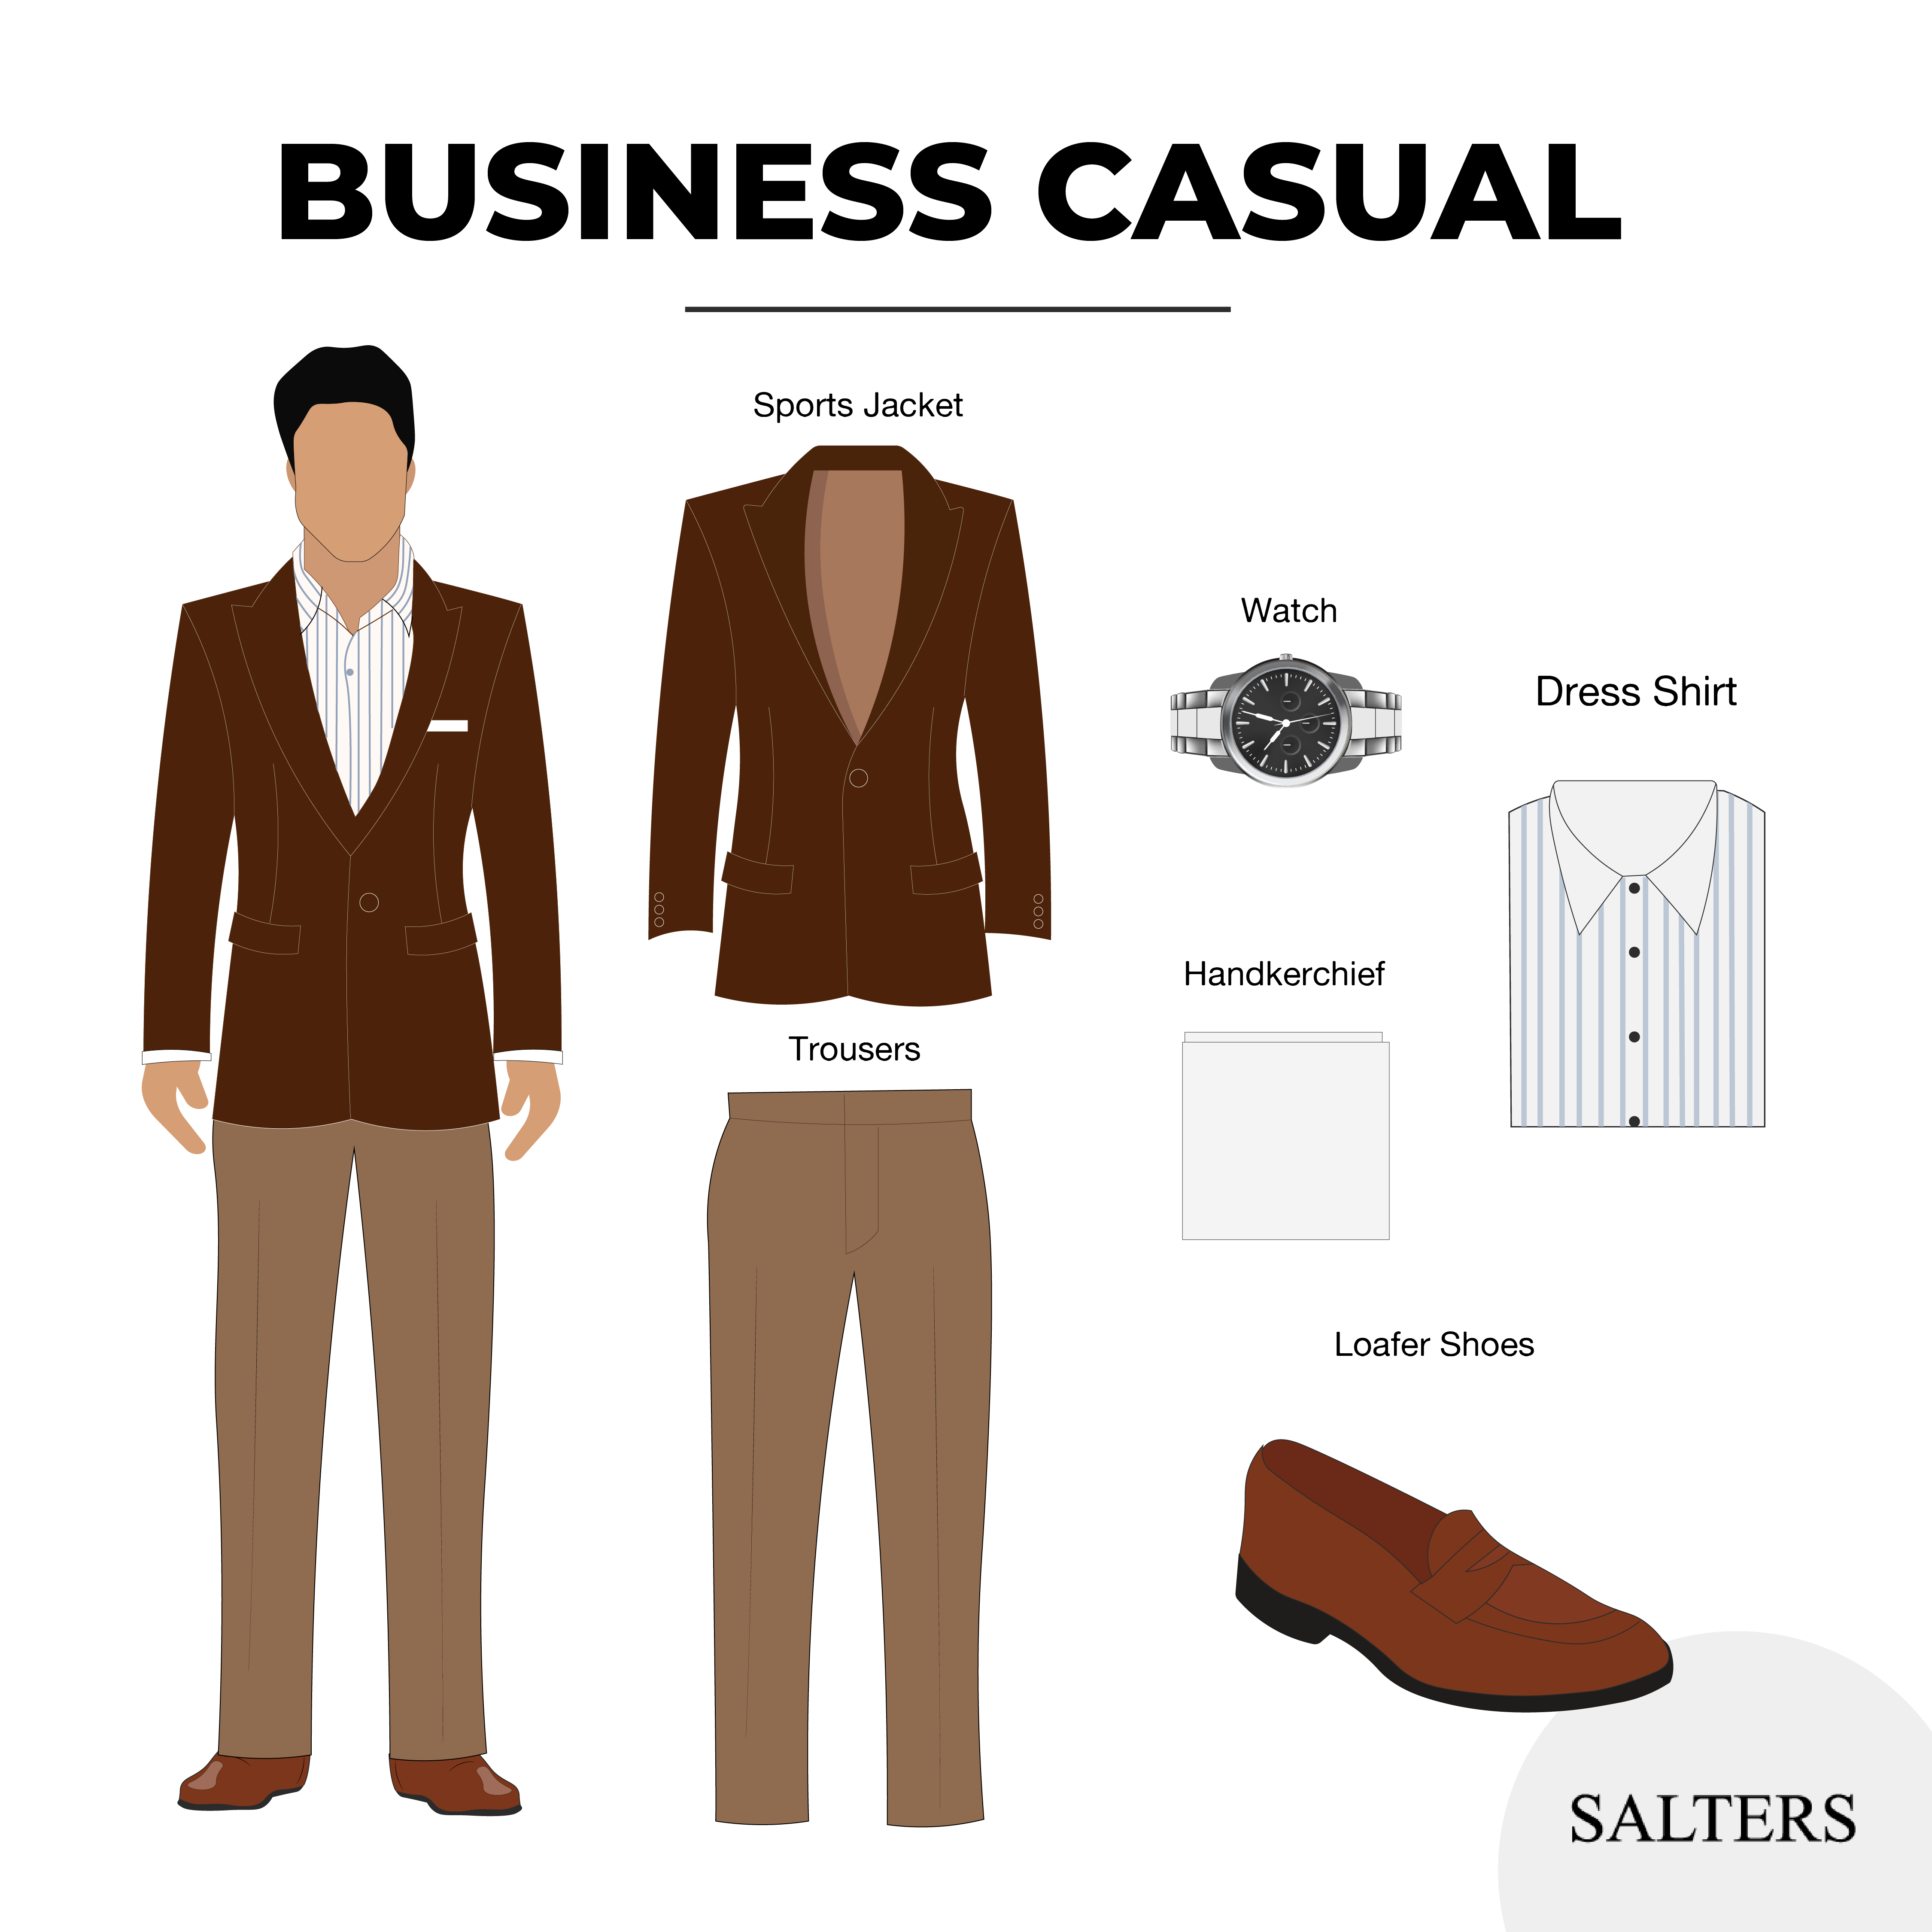 A Guide To Social Dress Codes For Men: Business, Formal, Optional